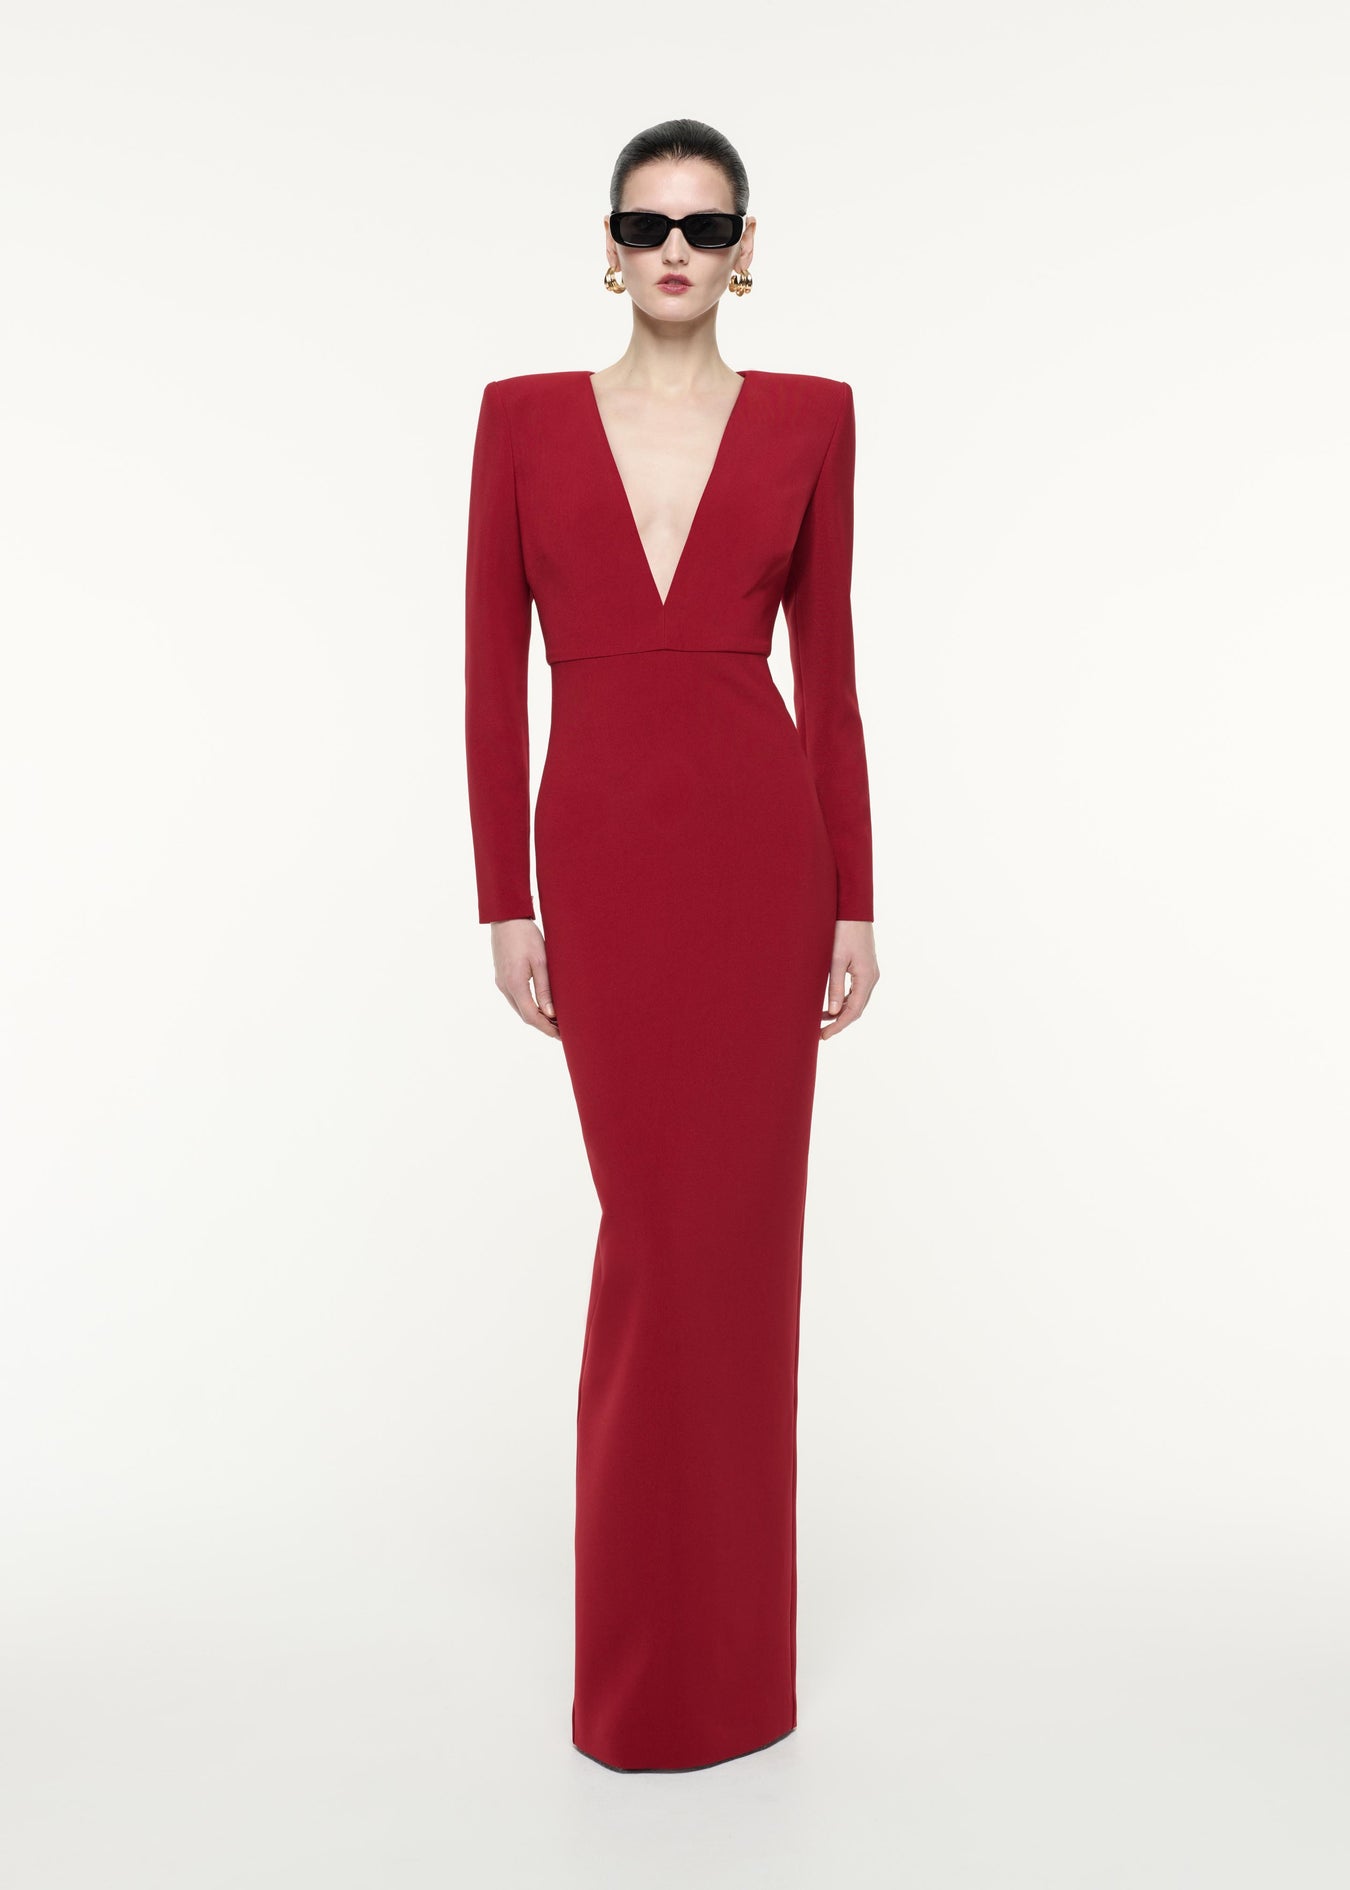 A front view image of a model wearing the Long Sleeve Crepe Maxi Dress in Red